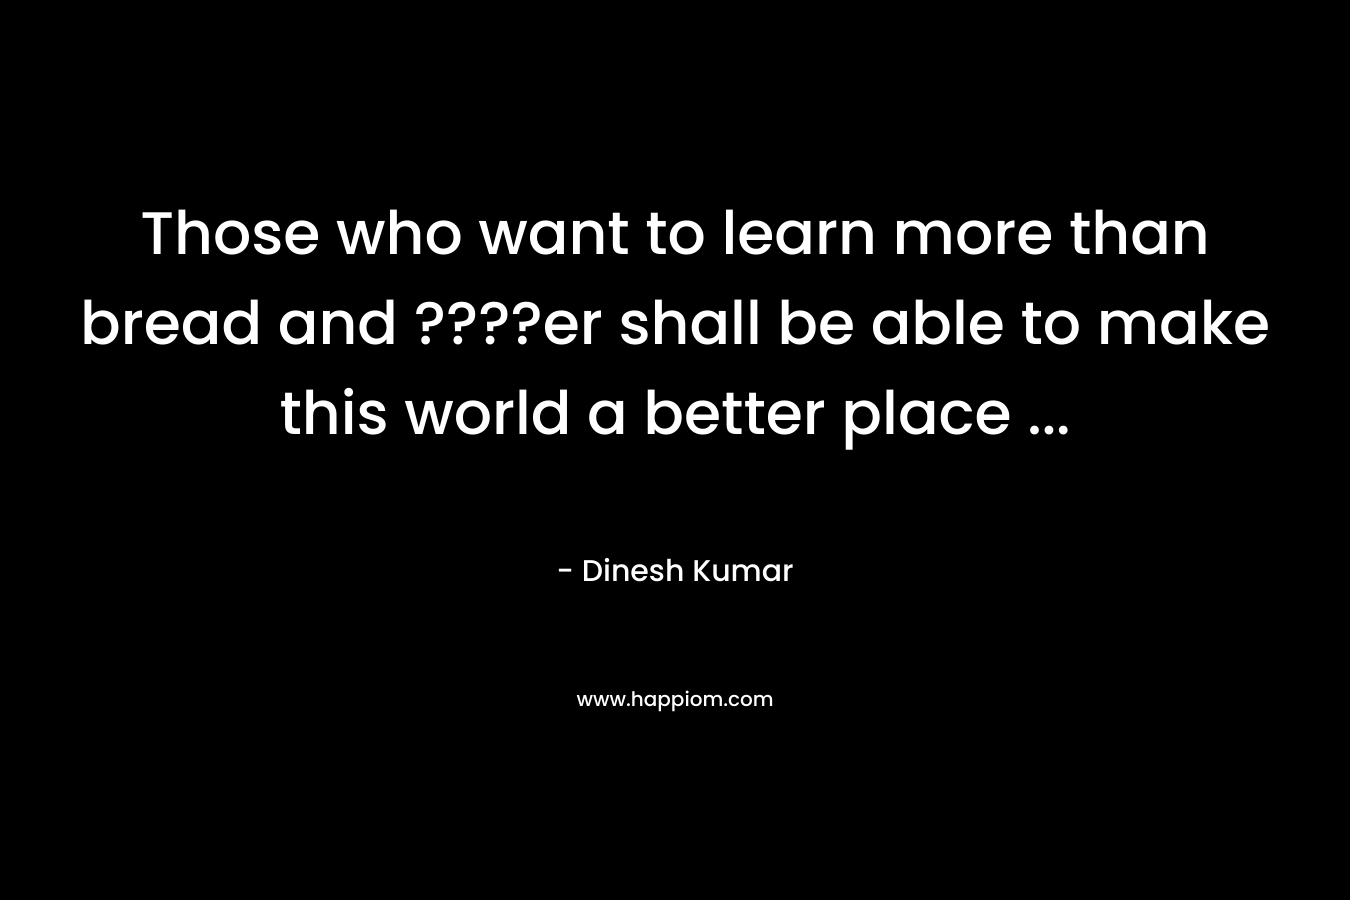 Those who want to learn more than bread and ????er shall be able to make this world a better place ...